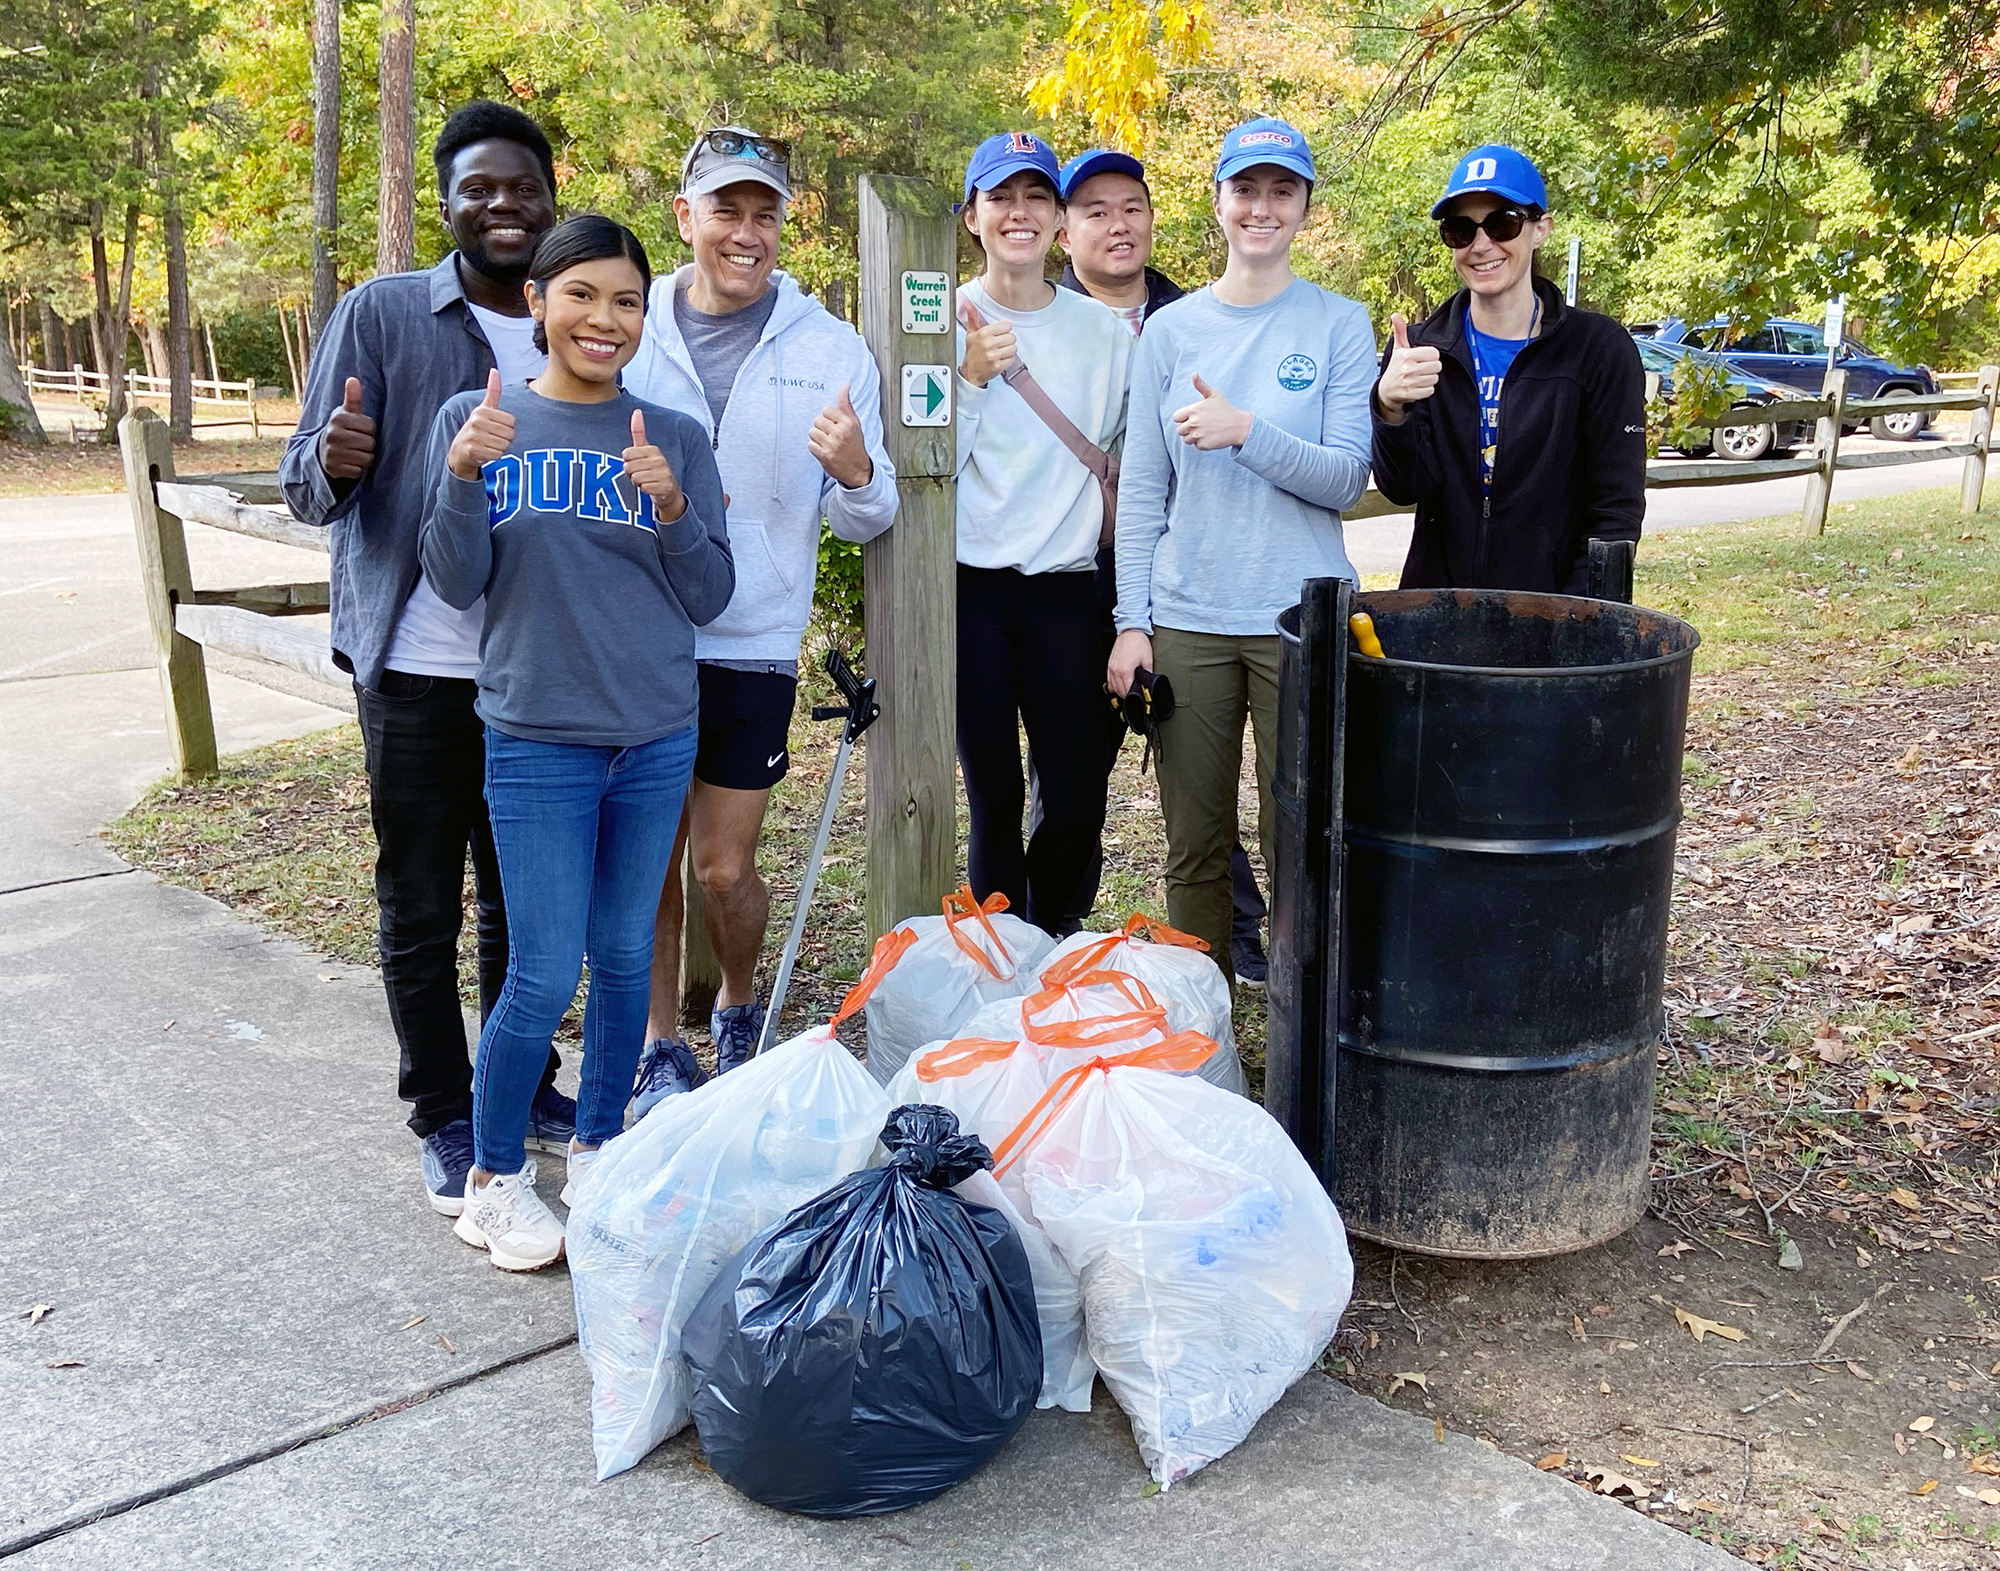 IIB team cleans up on service day